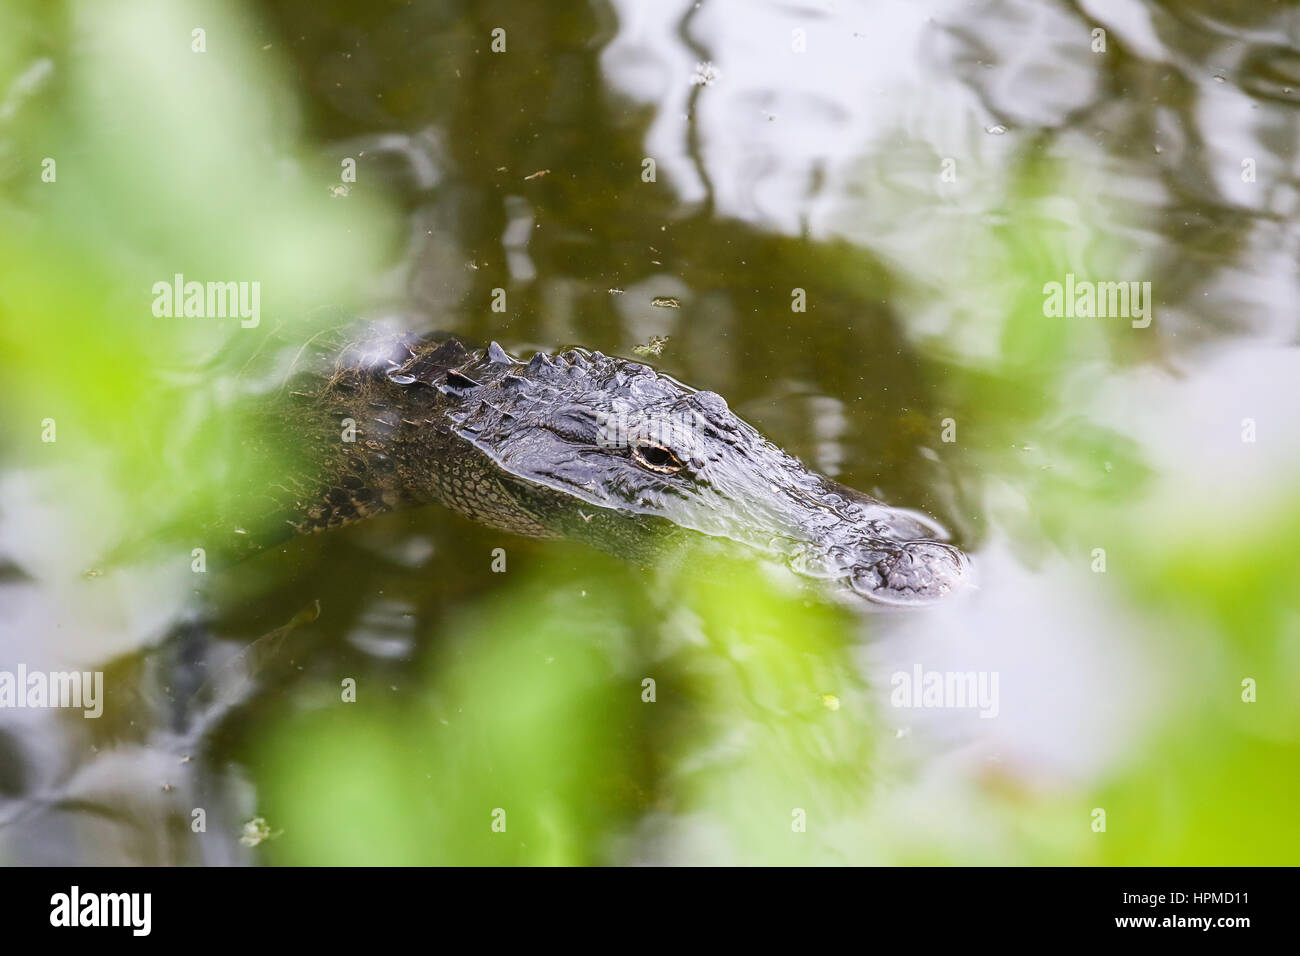 Ochopee, USA - MAY 11, 2015: American alligator swimming in the Everglades with the eyes and snout above water. The photo shows the head of the animal Stock Photo